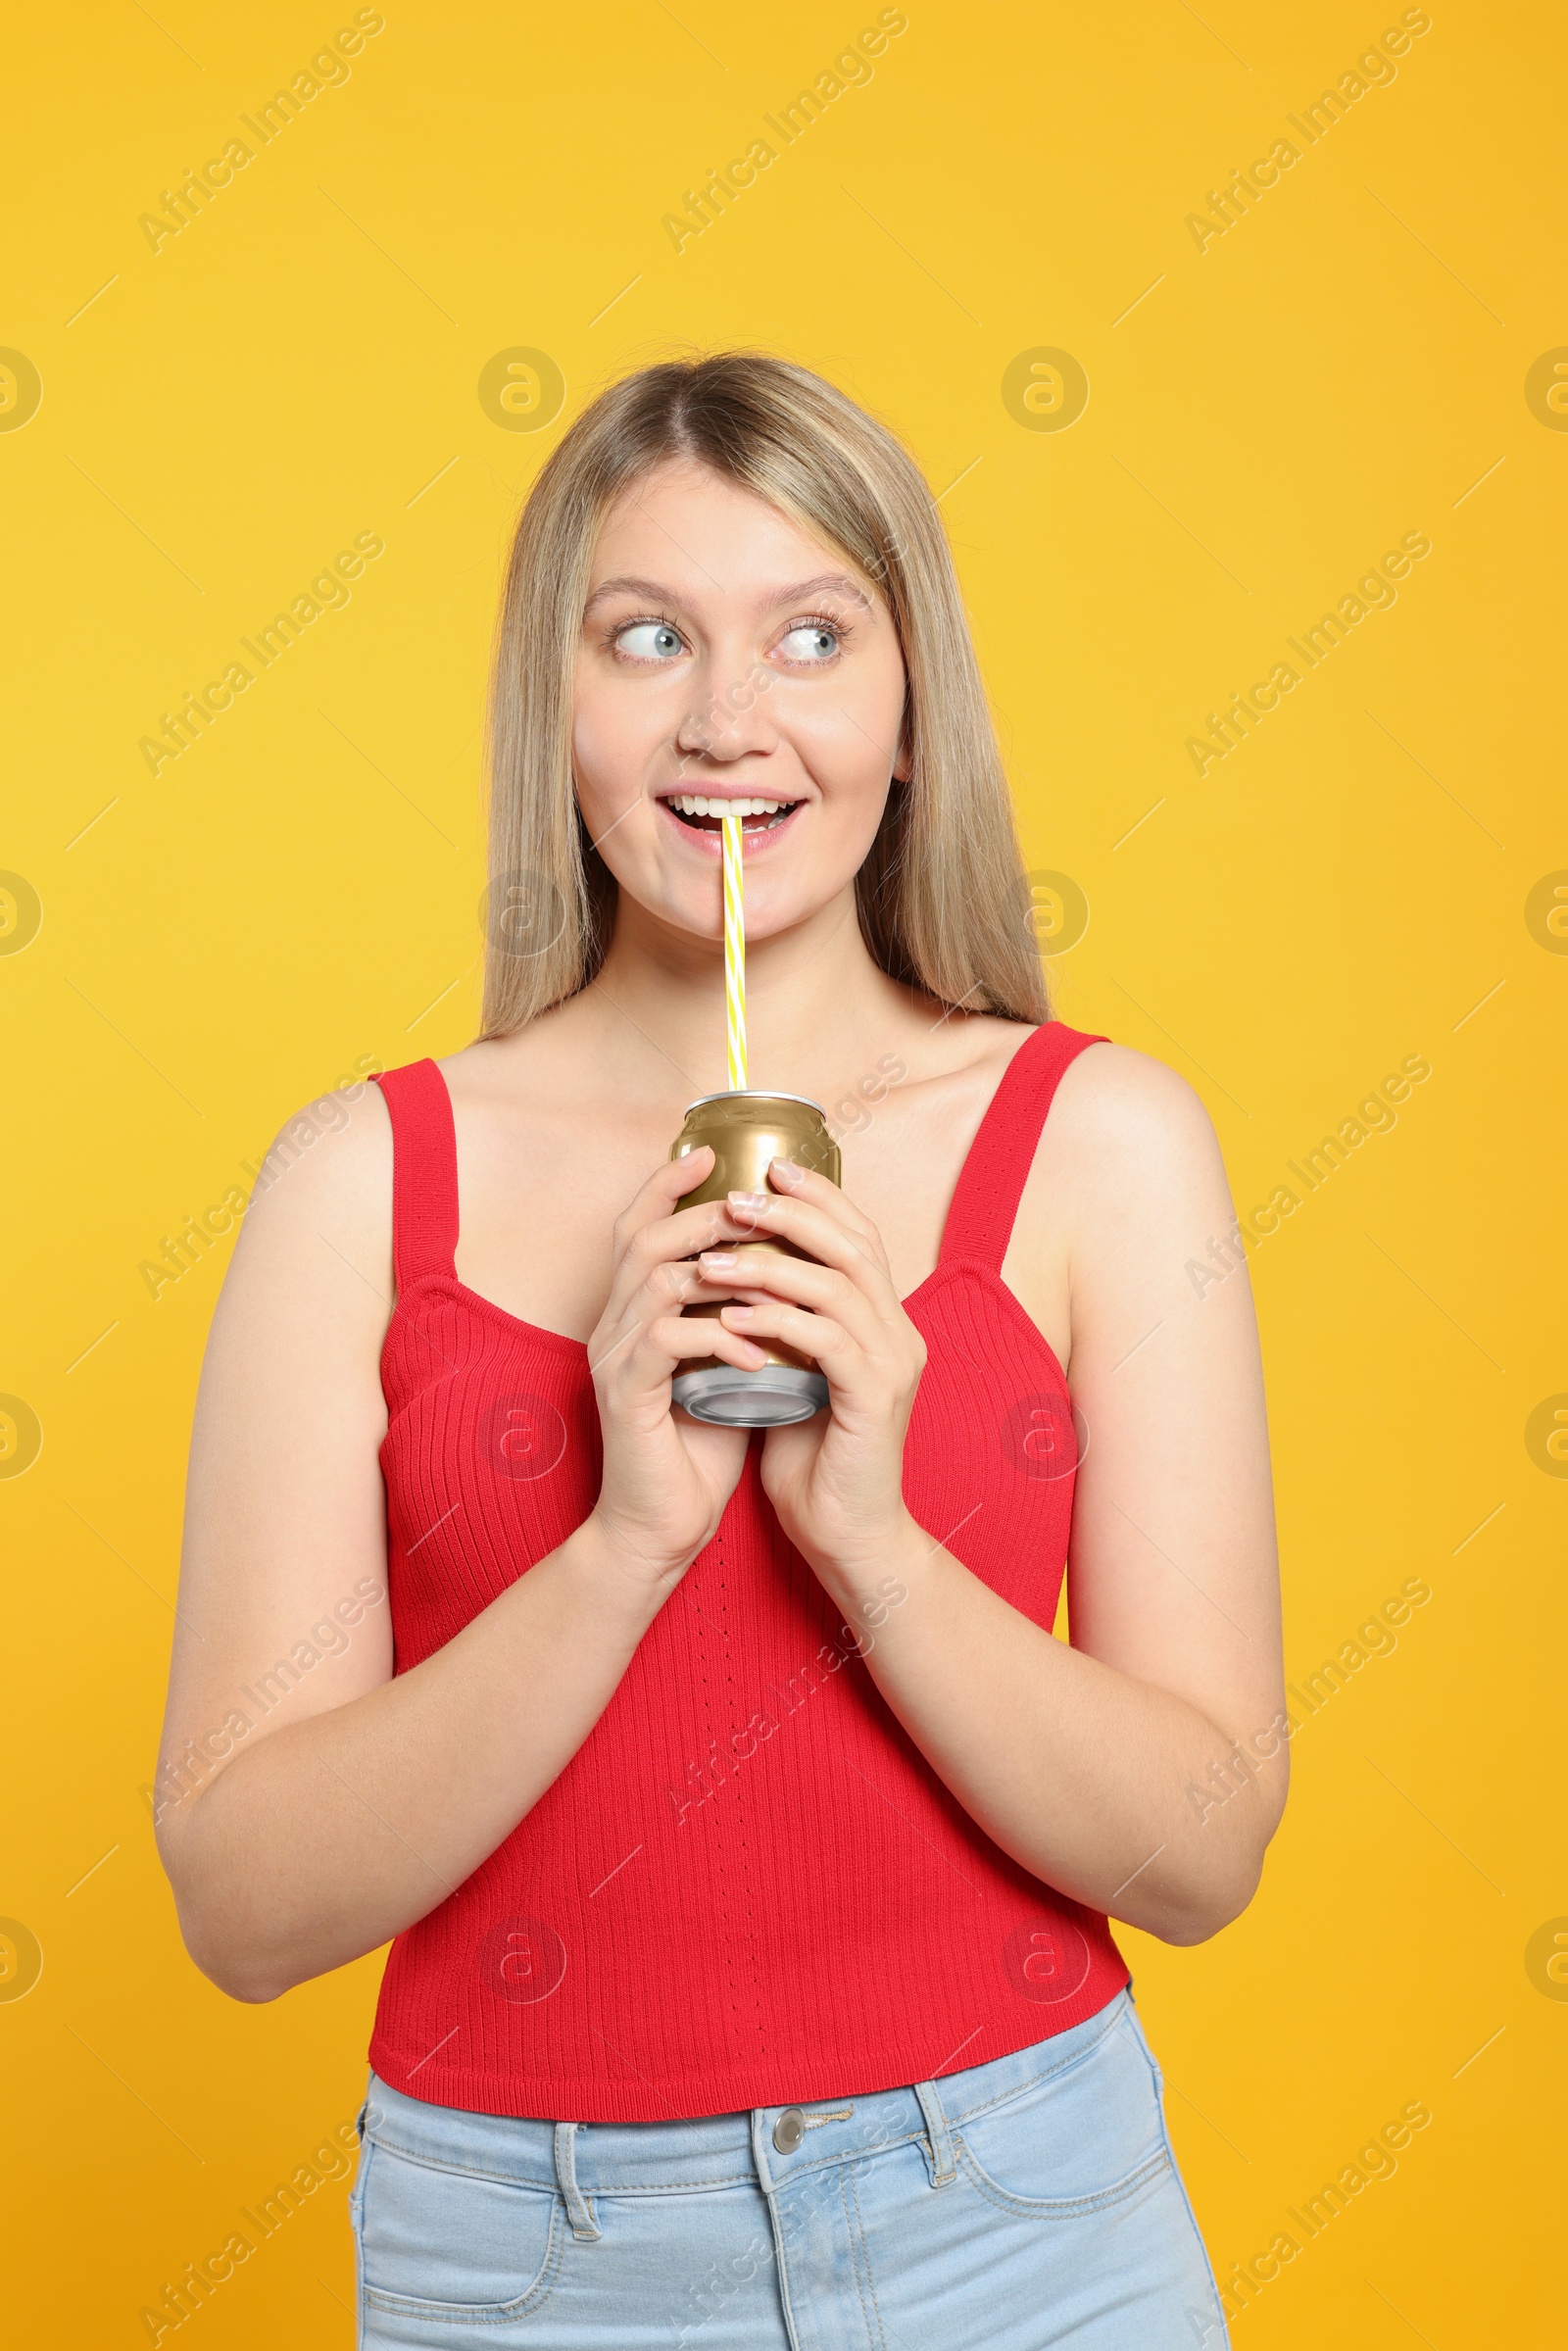 Photo of Beautiful woman drinking from beverage can on yellow background